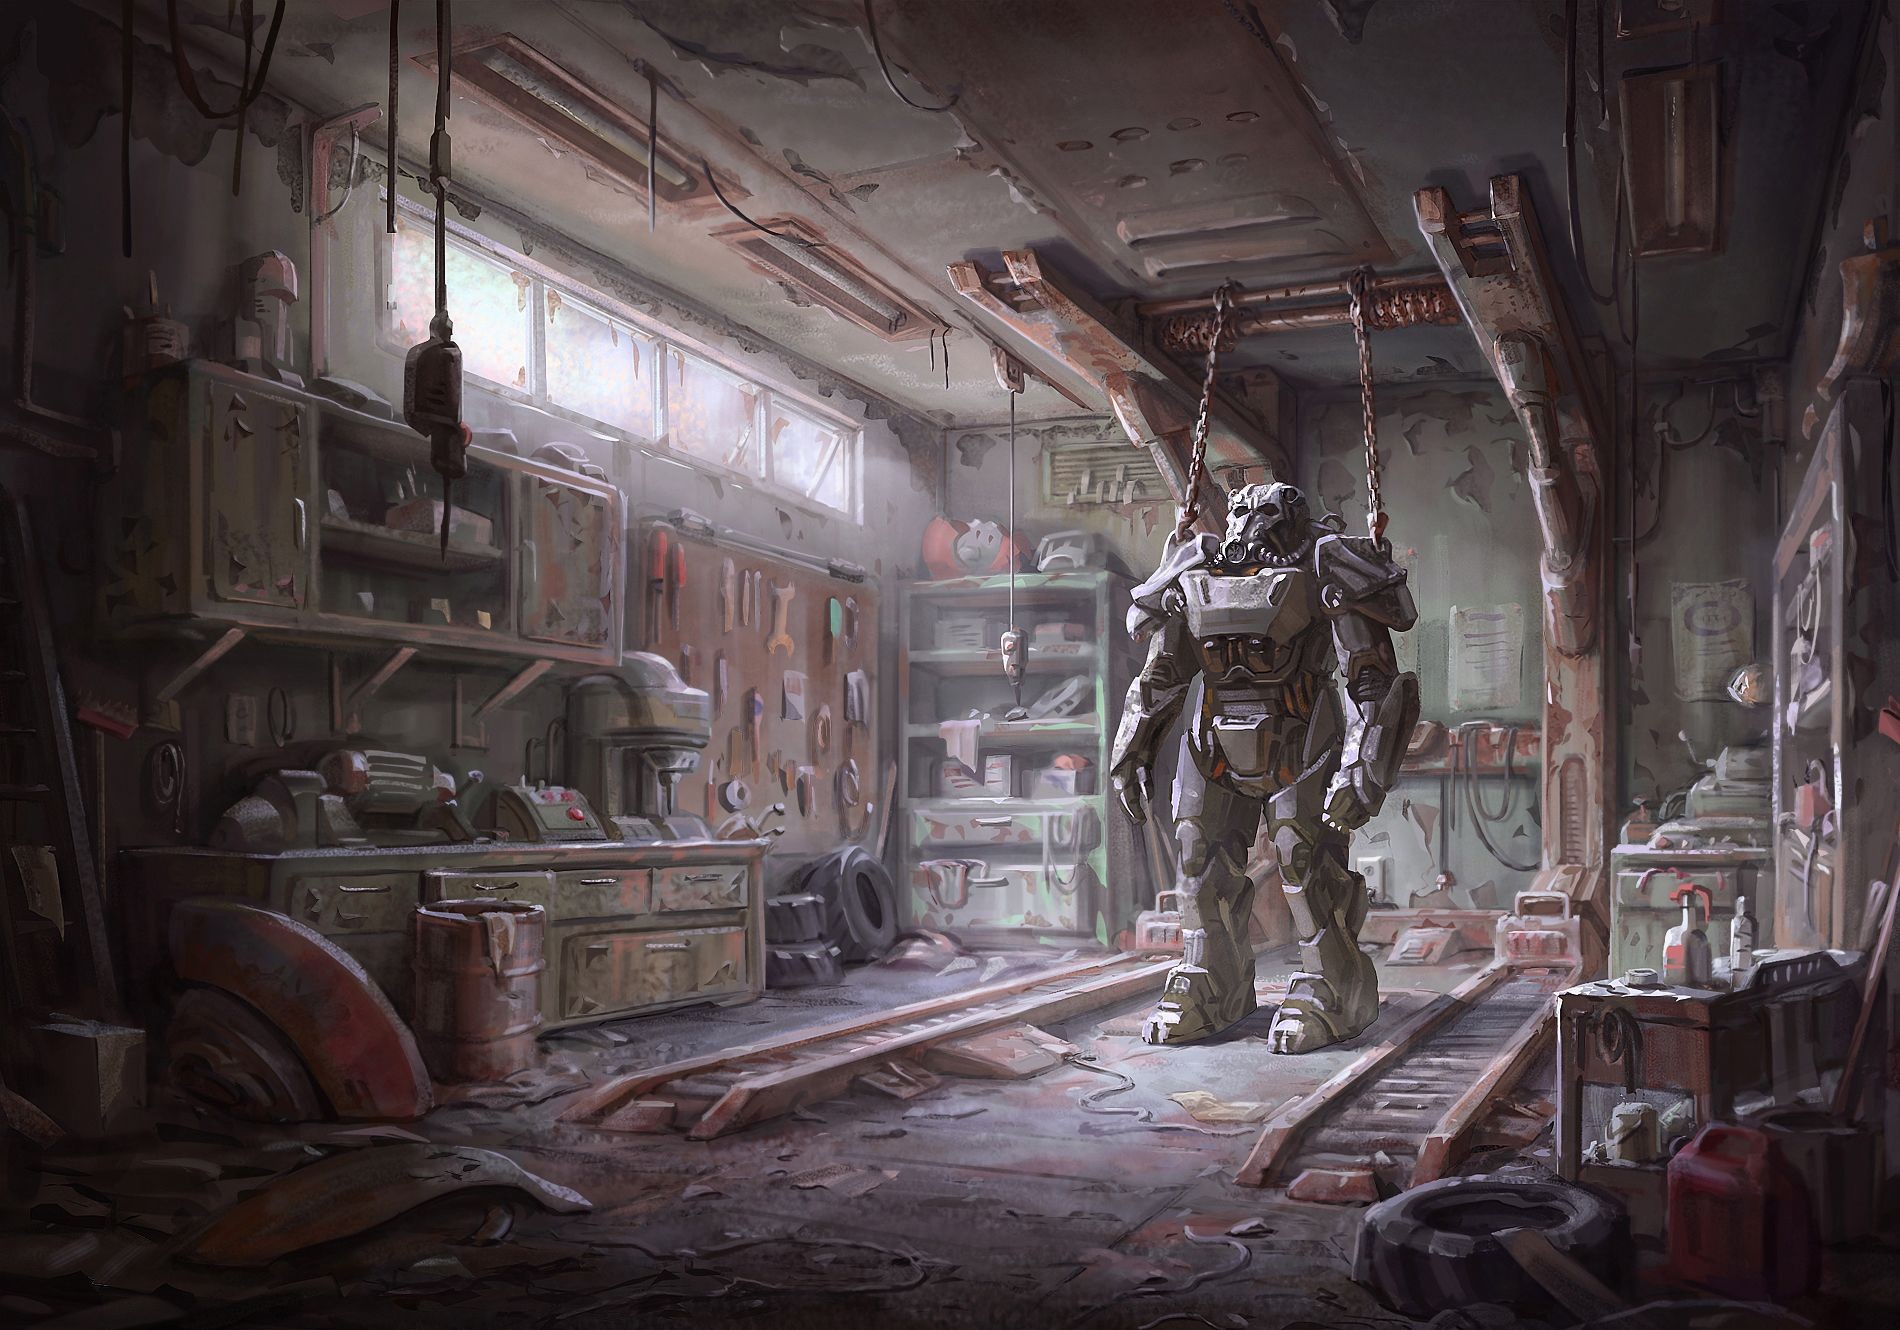 General 1900x1330 Fallout 4 concept art Fallout video games Brotherhood of Steel armor PC gaming science fiction video game art